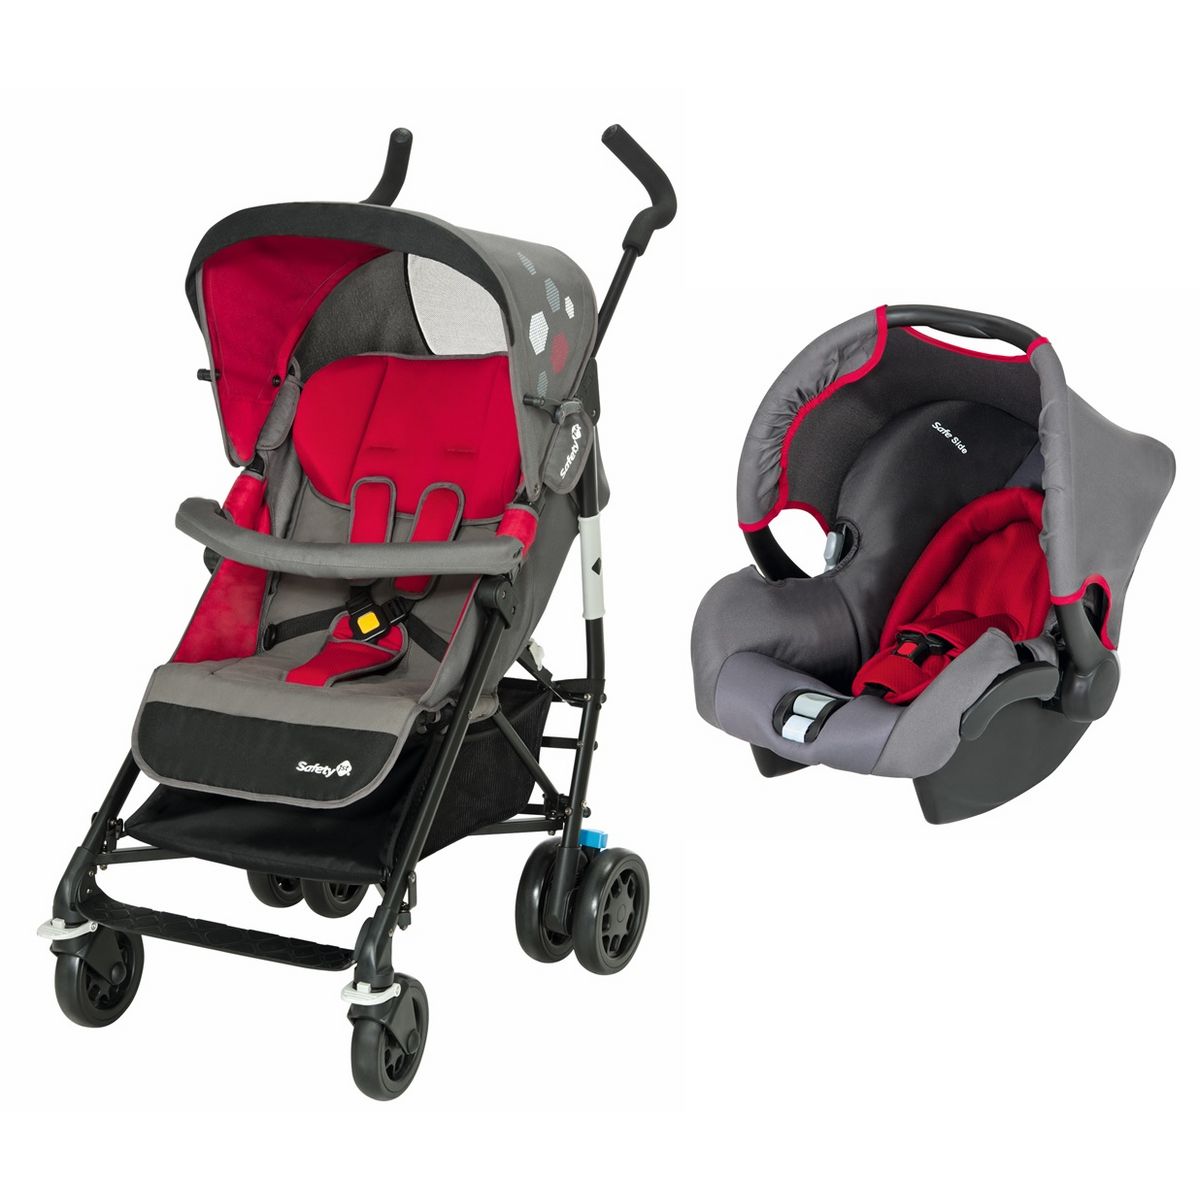 Discrimineren Miljard staal SAFETY FIRST Poussette Combiné duo Easy Way pas cher - Auchan.fr